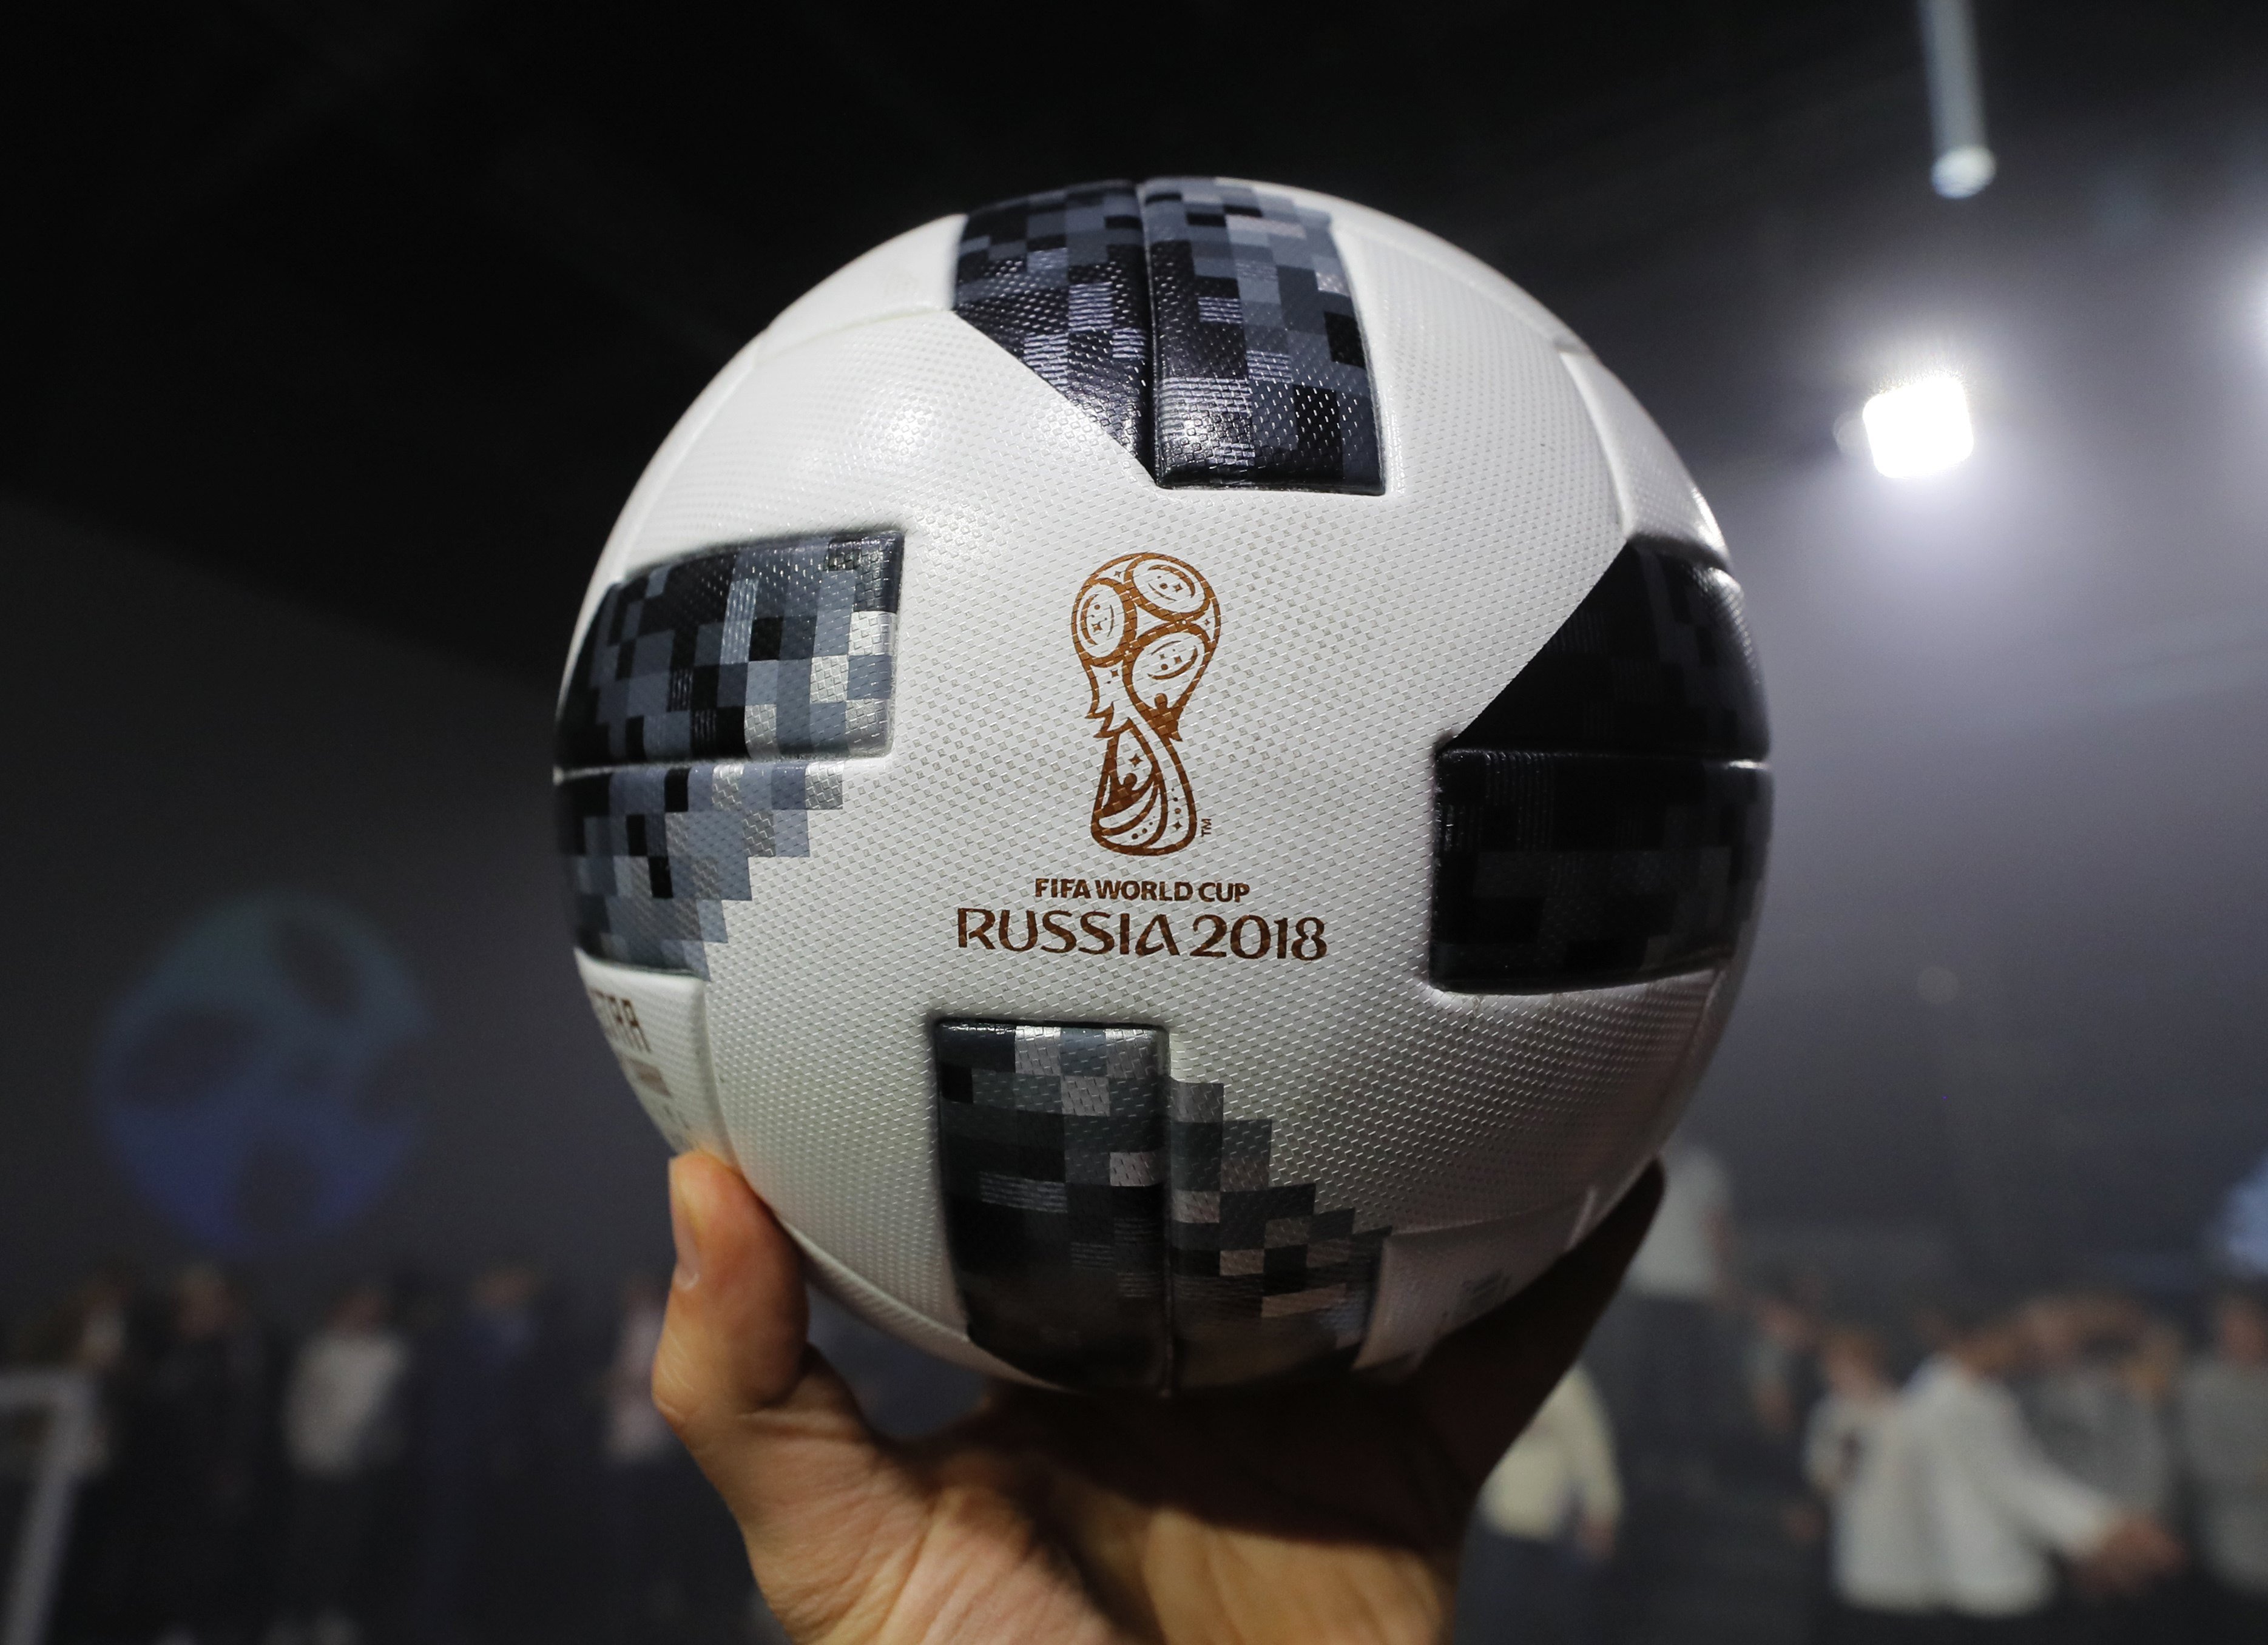 The official match ball for the 2018 FIFA World Cup, which takes place in Russia from June 14 to July 15. Photo: EPA-EFE